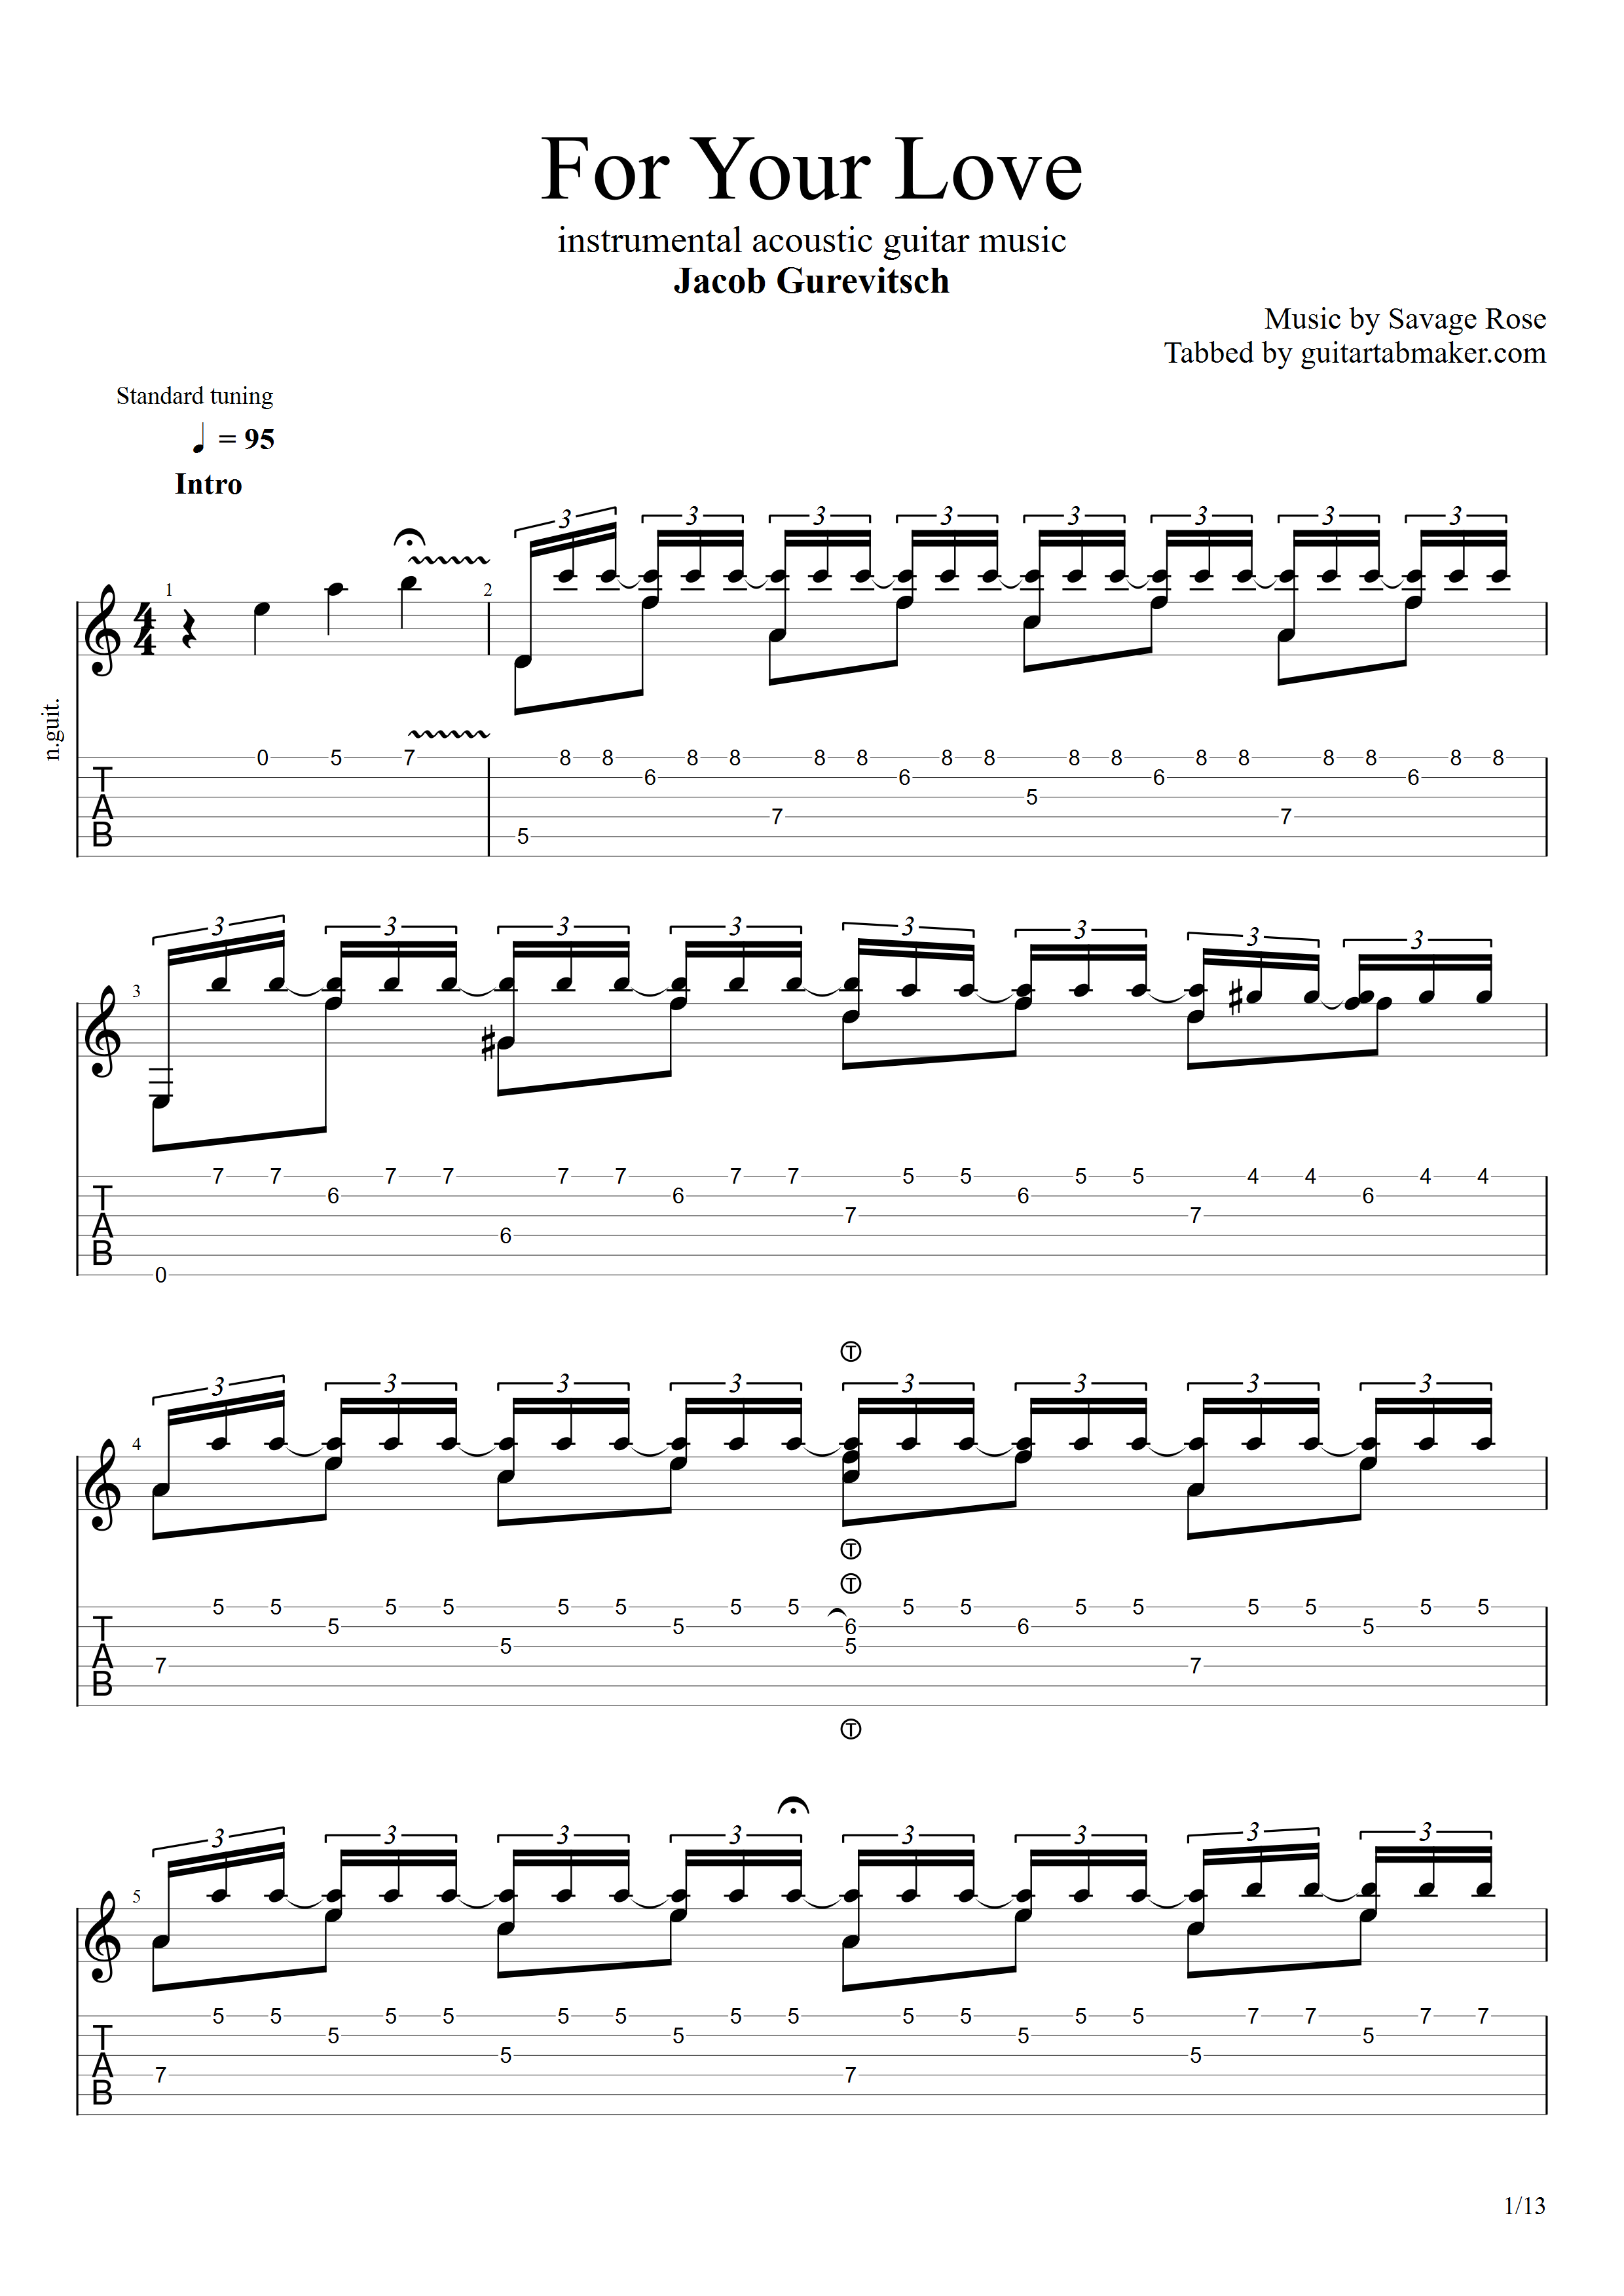 Jacob Gurevitsch - For Your Love guitar TAB